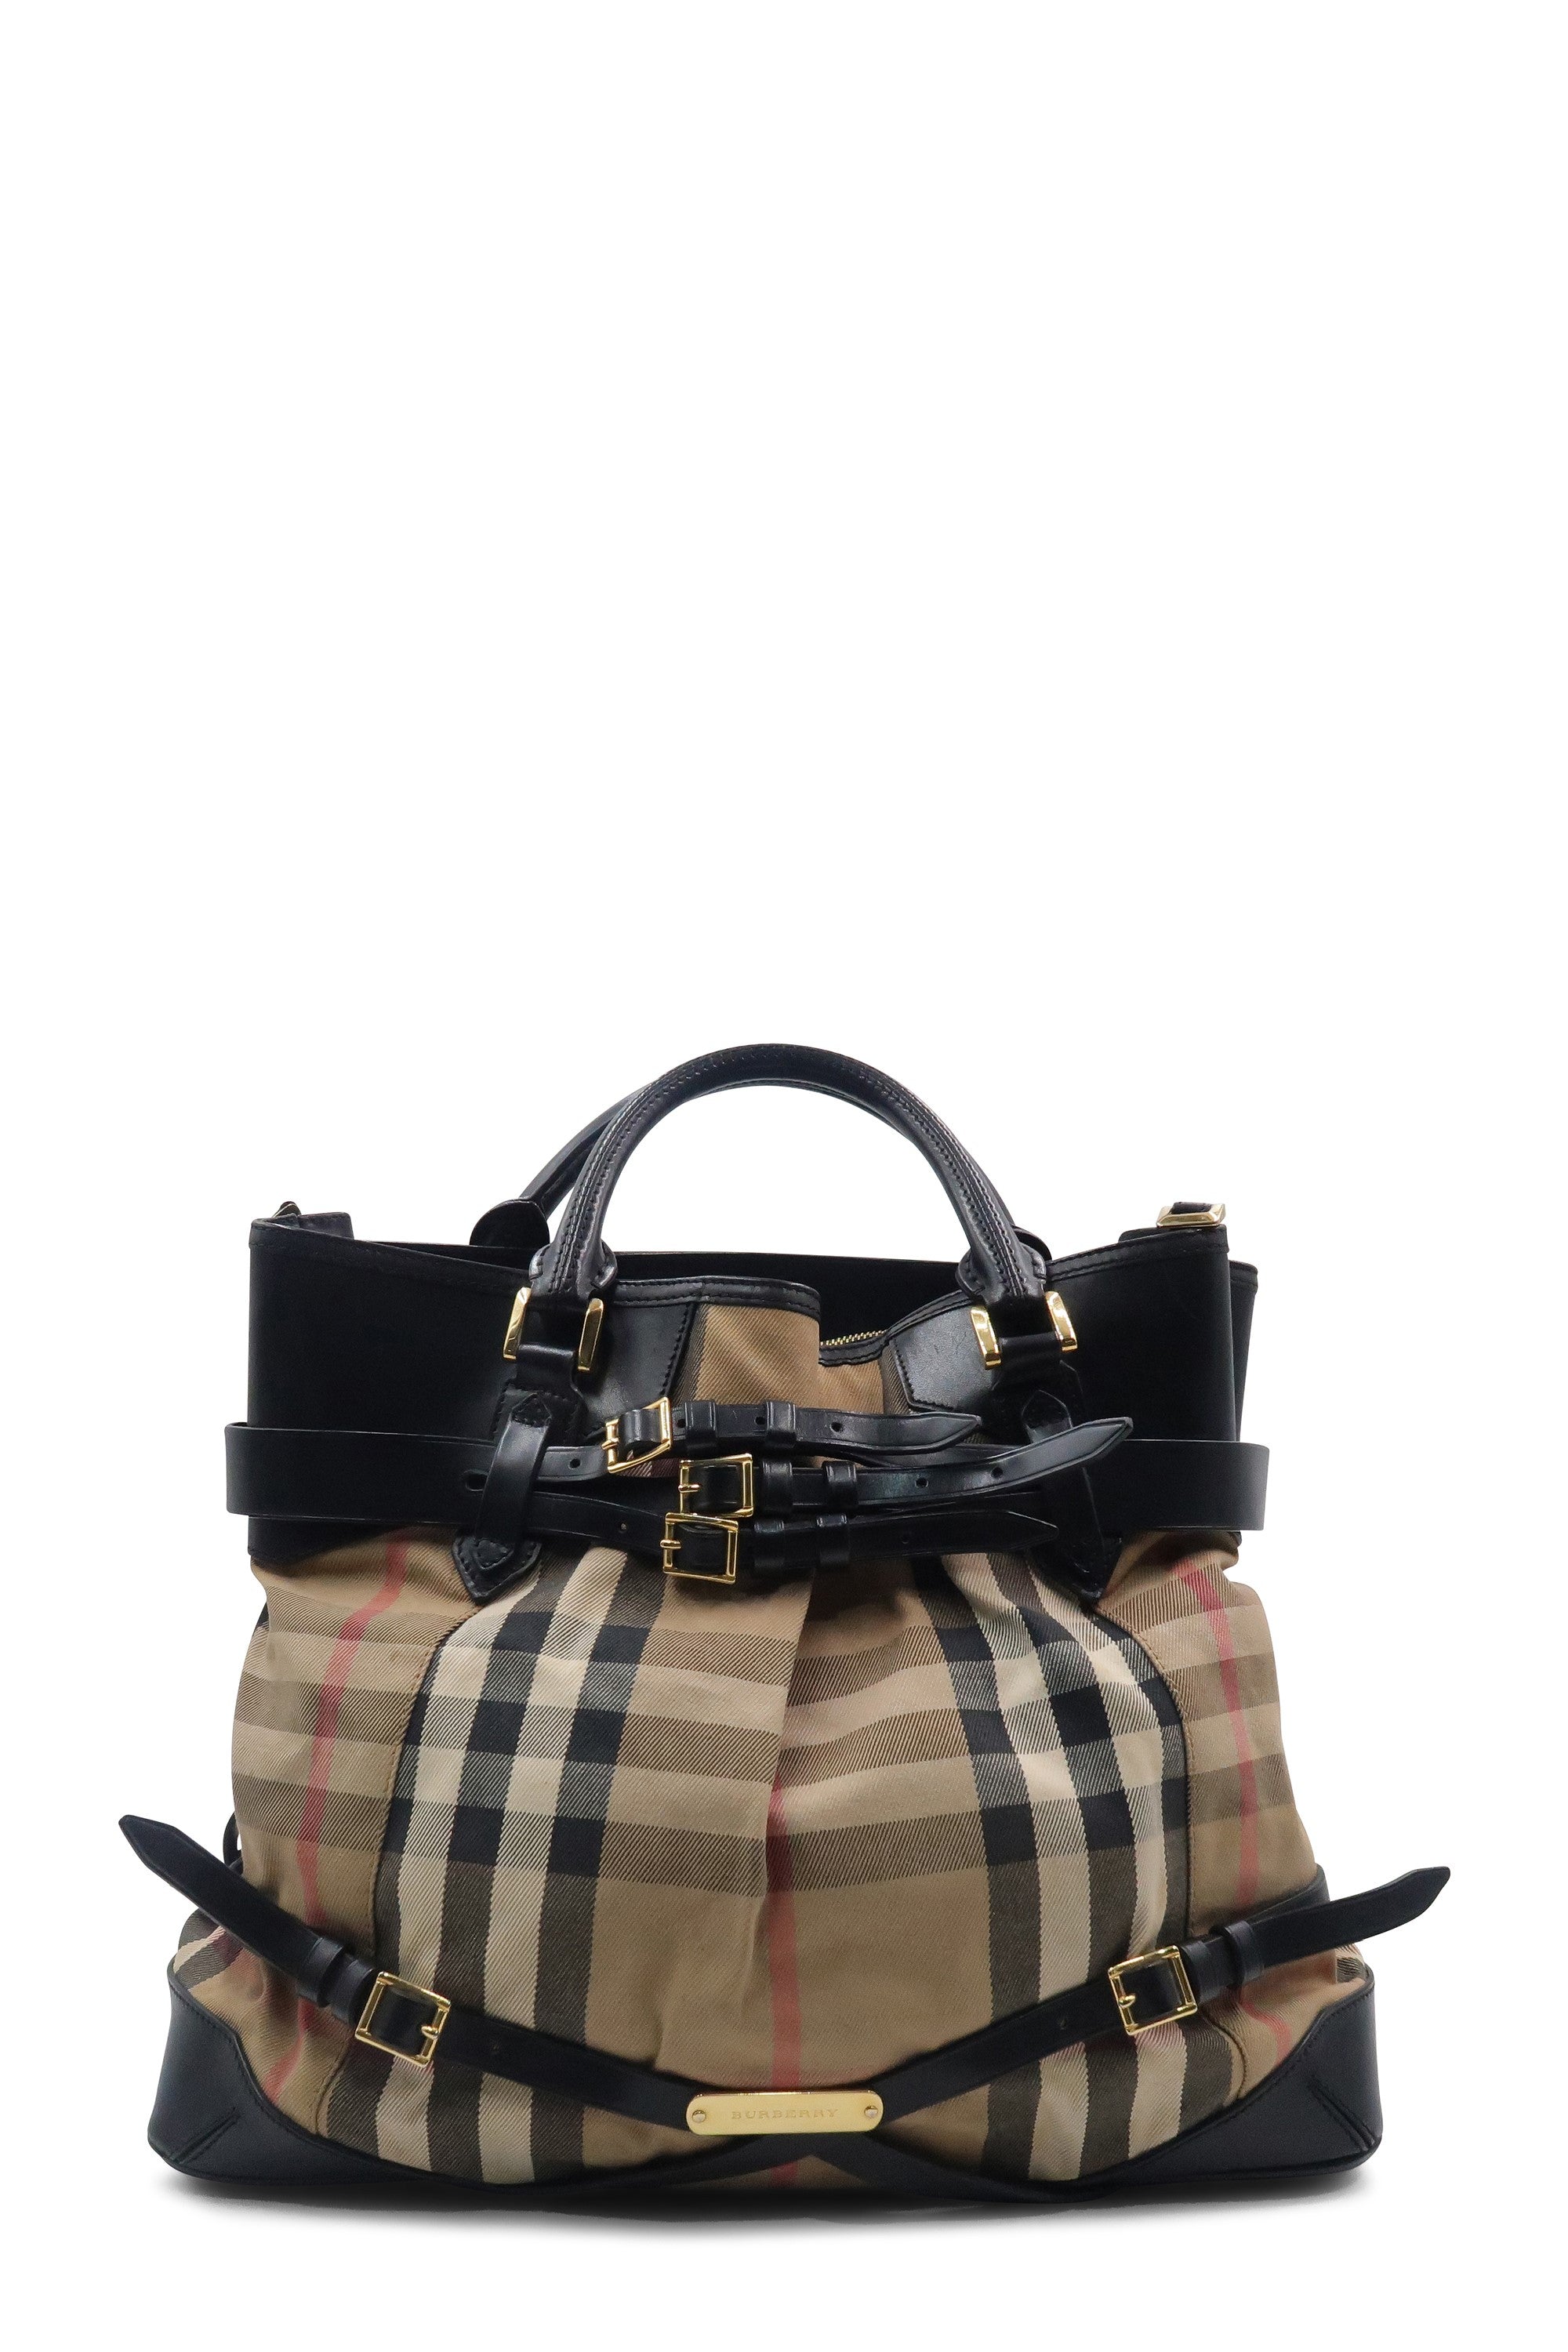 Tan Burberry Bridle Leather Tote | Designer Revival